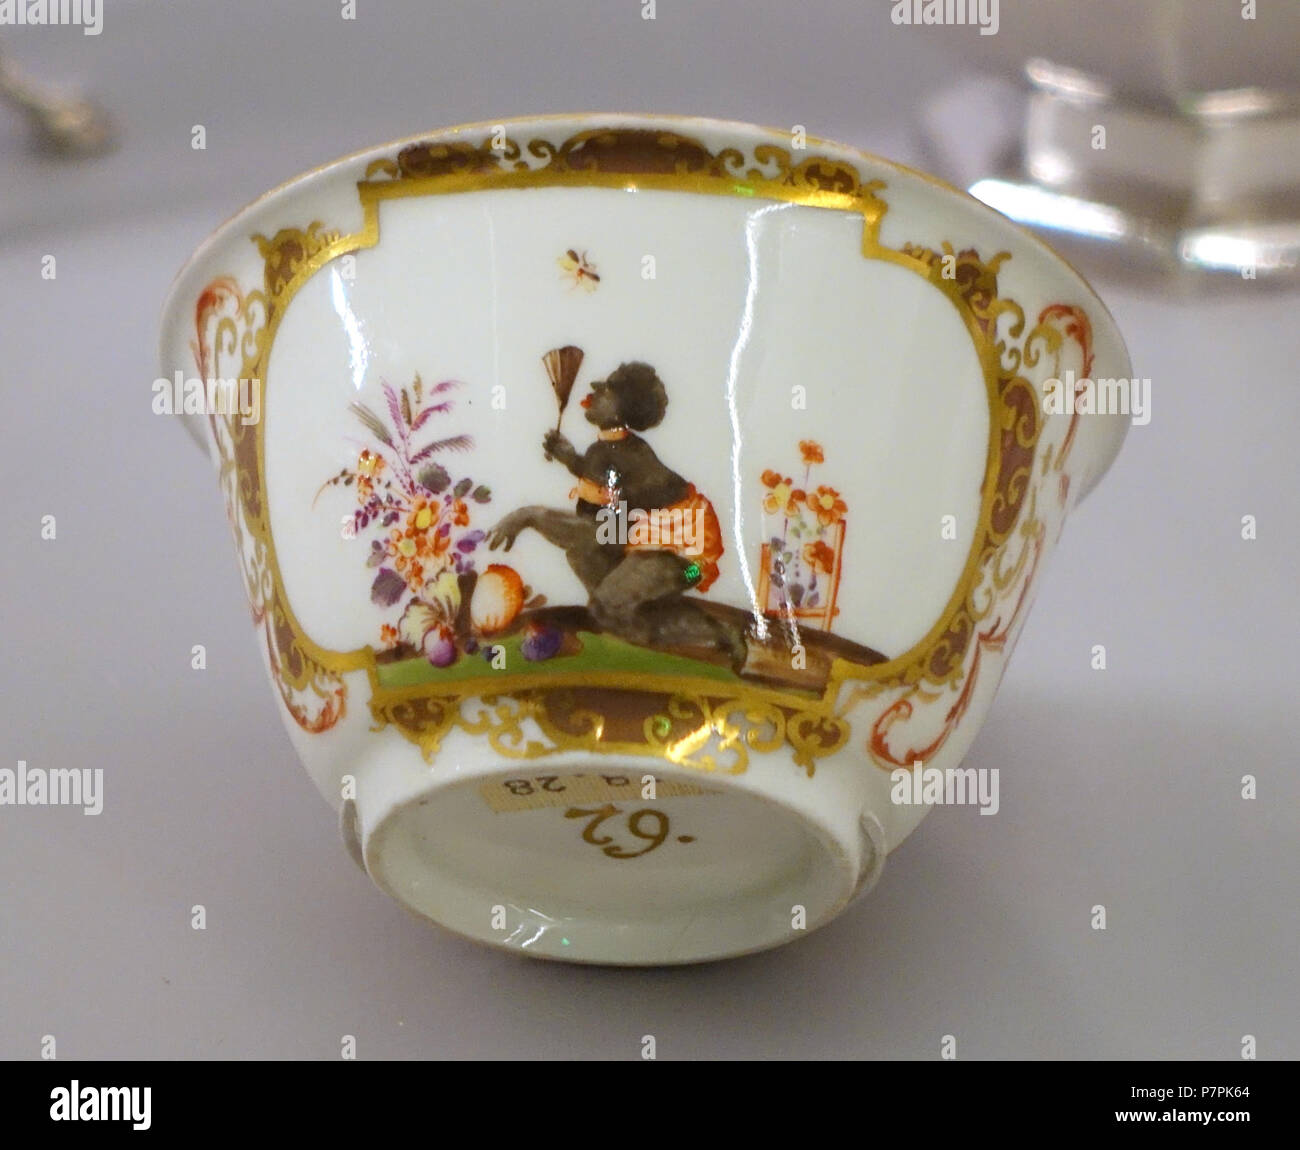 English: Exhibit in the Busch-Reisinger Museum, Harvard University, Cambridge, Massachusetts, USA. This artwork is in the  because the artist died more than 70 years ago. 11 April 2015, 12:16:08 100 Cup, Meissen Porcelain Manufactory, early 1700s, hard-paste porcelain, polychrome enamel, gilding - Busch-Reisinger Museum, Harvard University - DSC01336 Stock Photo